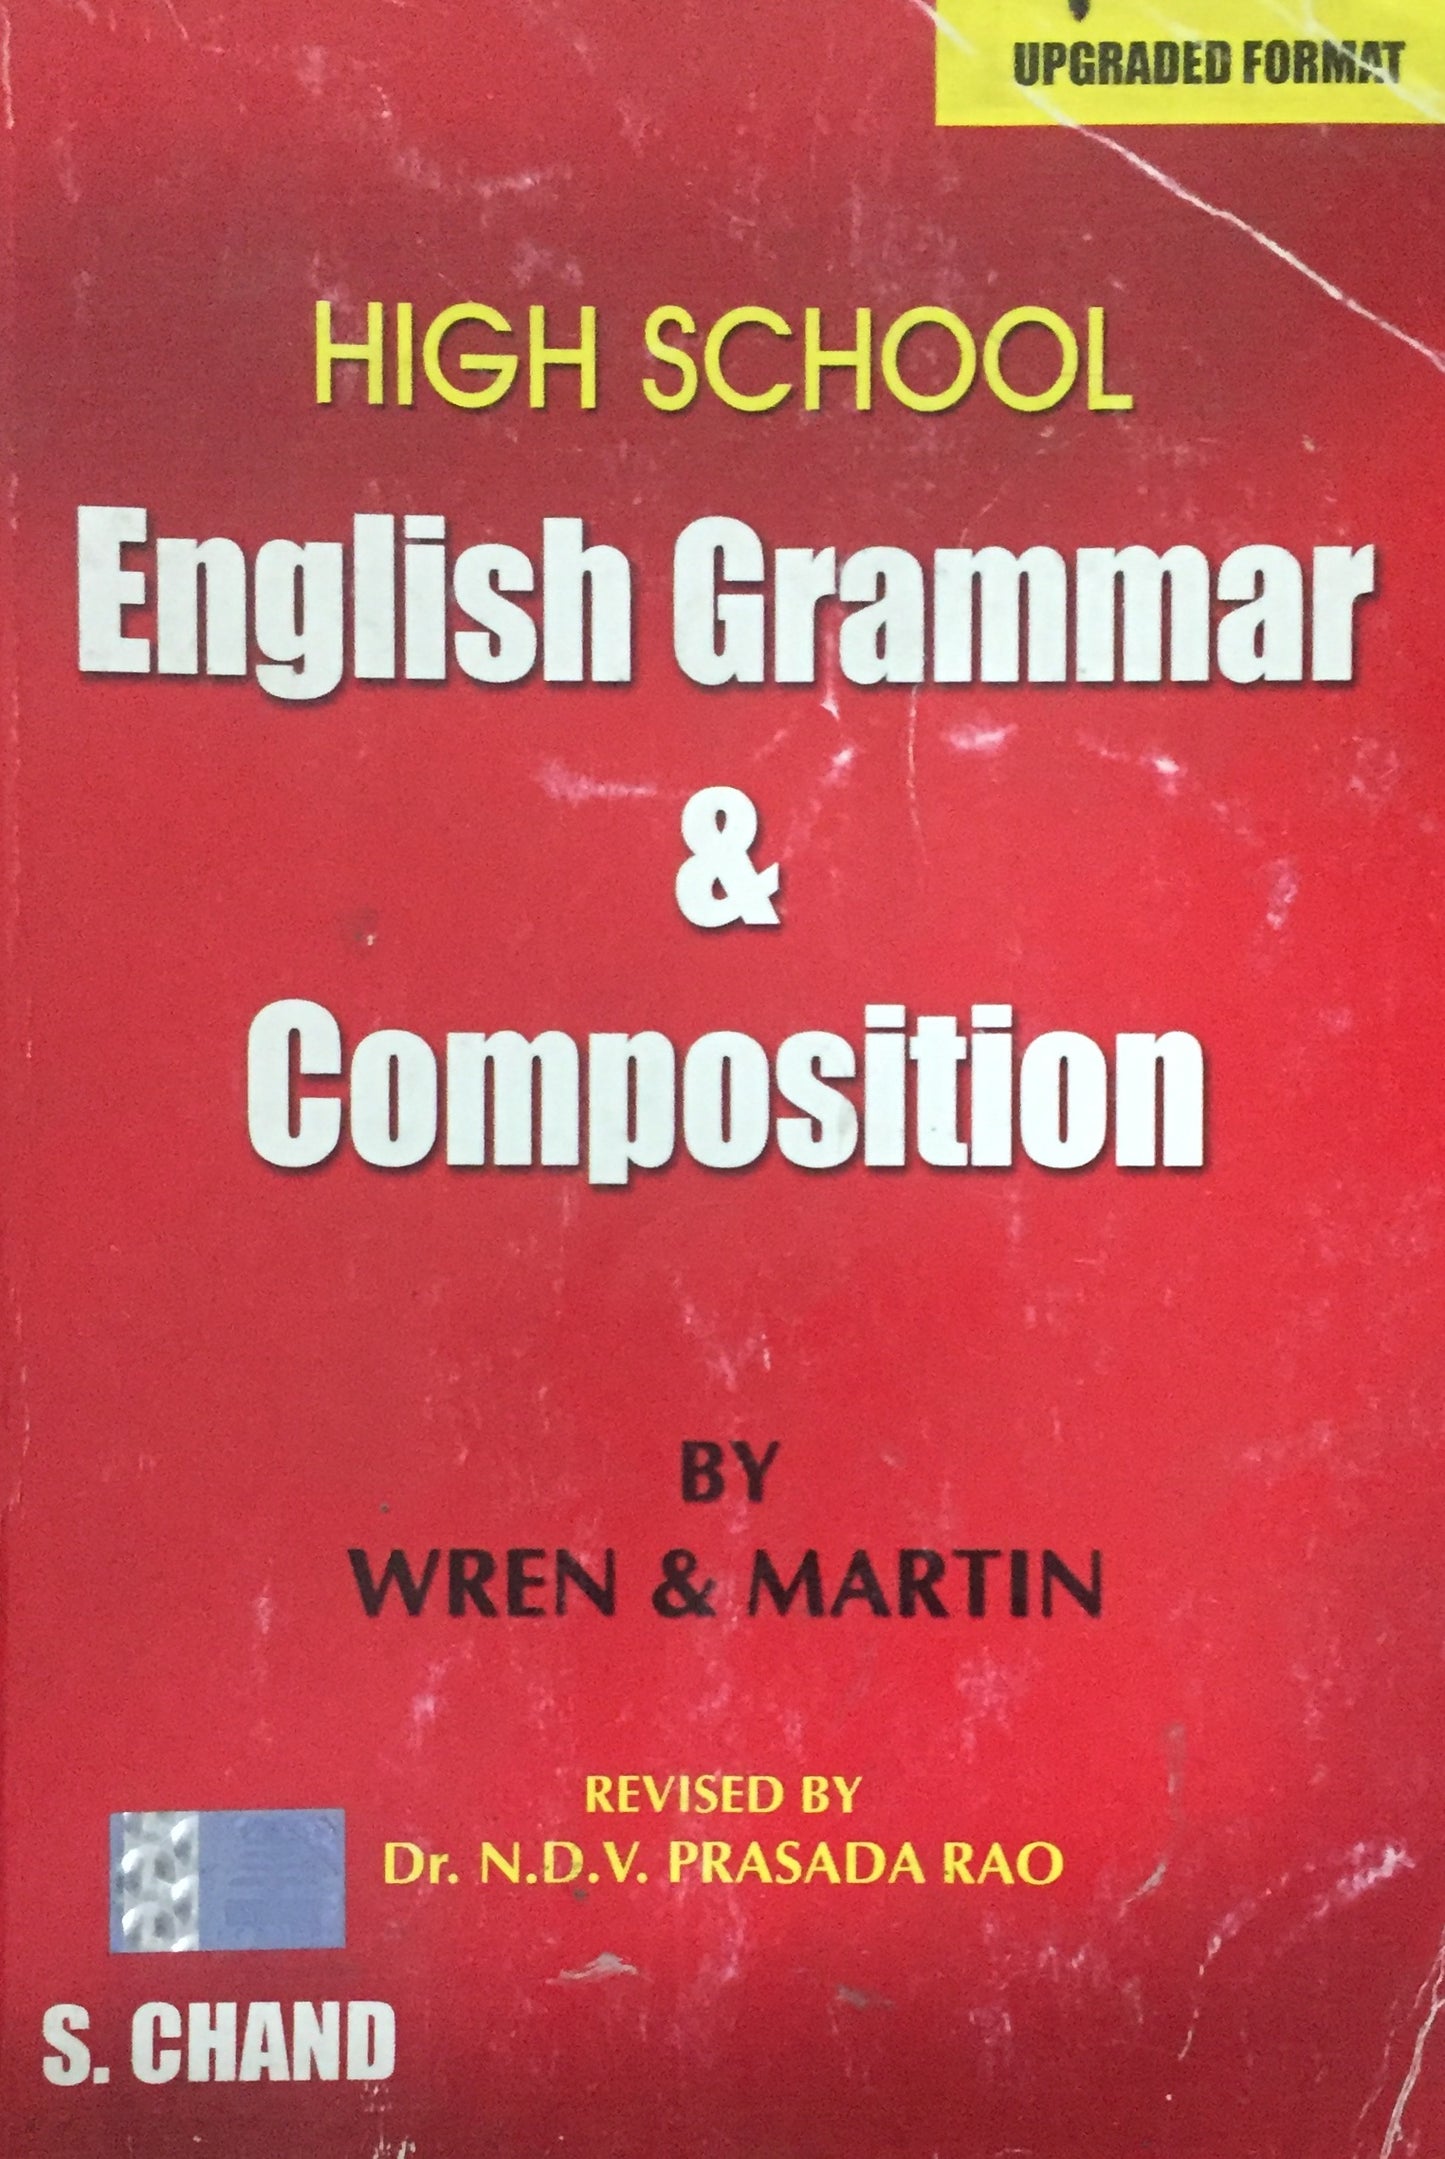 High School English Grammar &amp; Composition by Wren and Martin  Half Price Books India Books inspire-bookspace.myshopify.com Half Price Books India